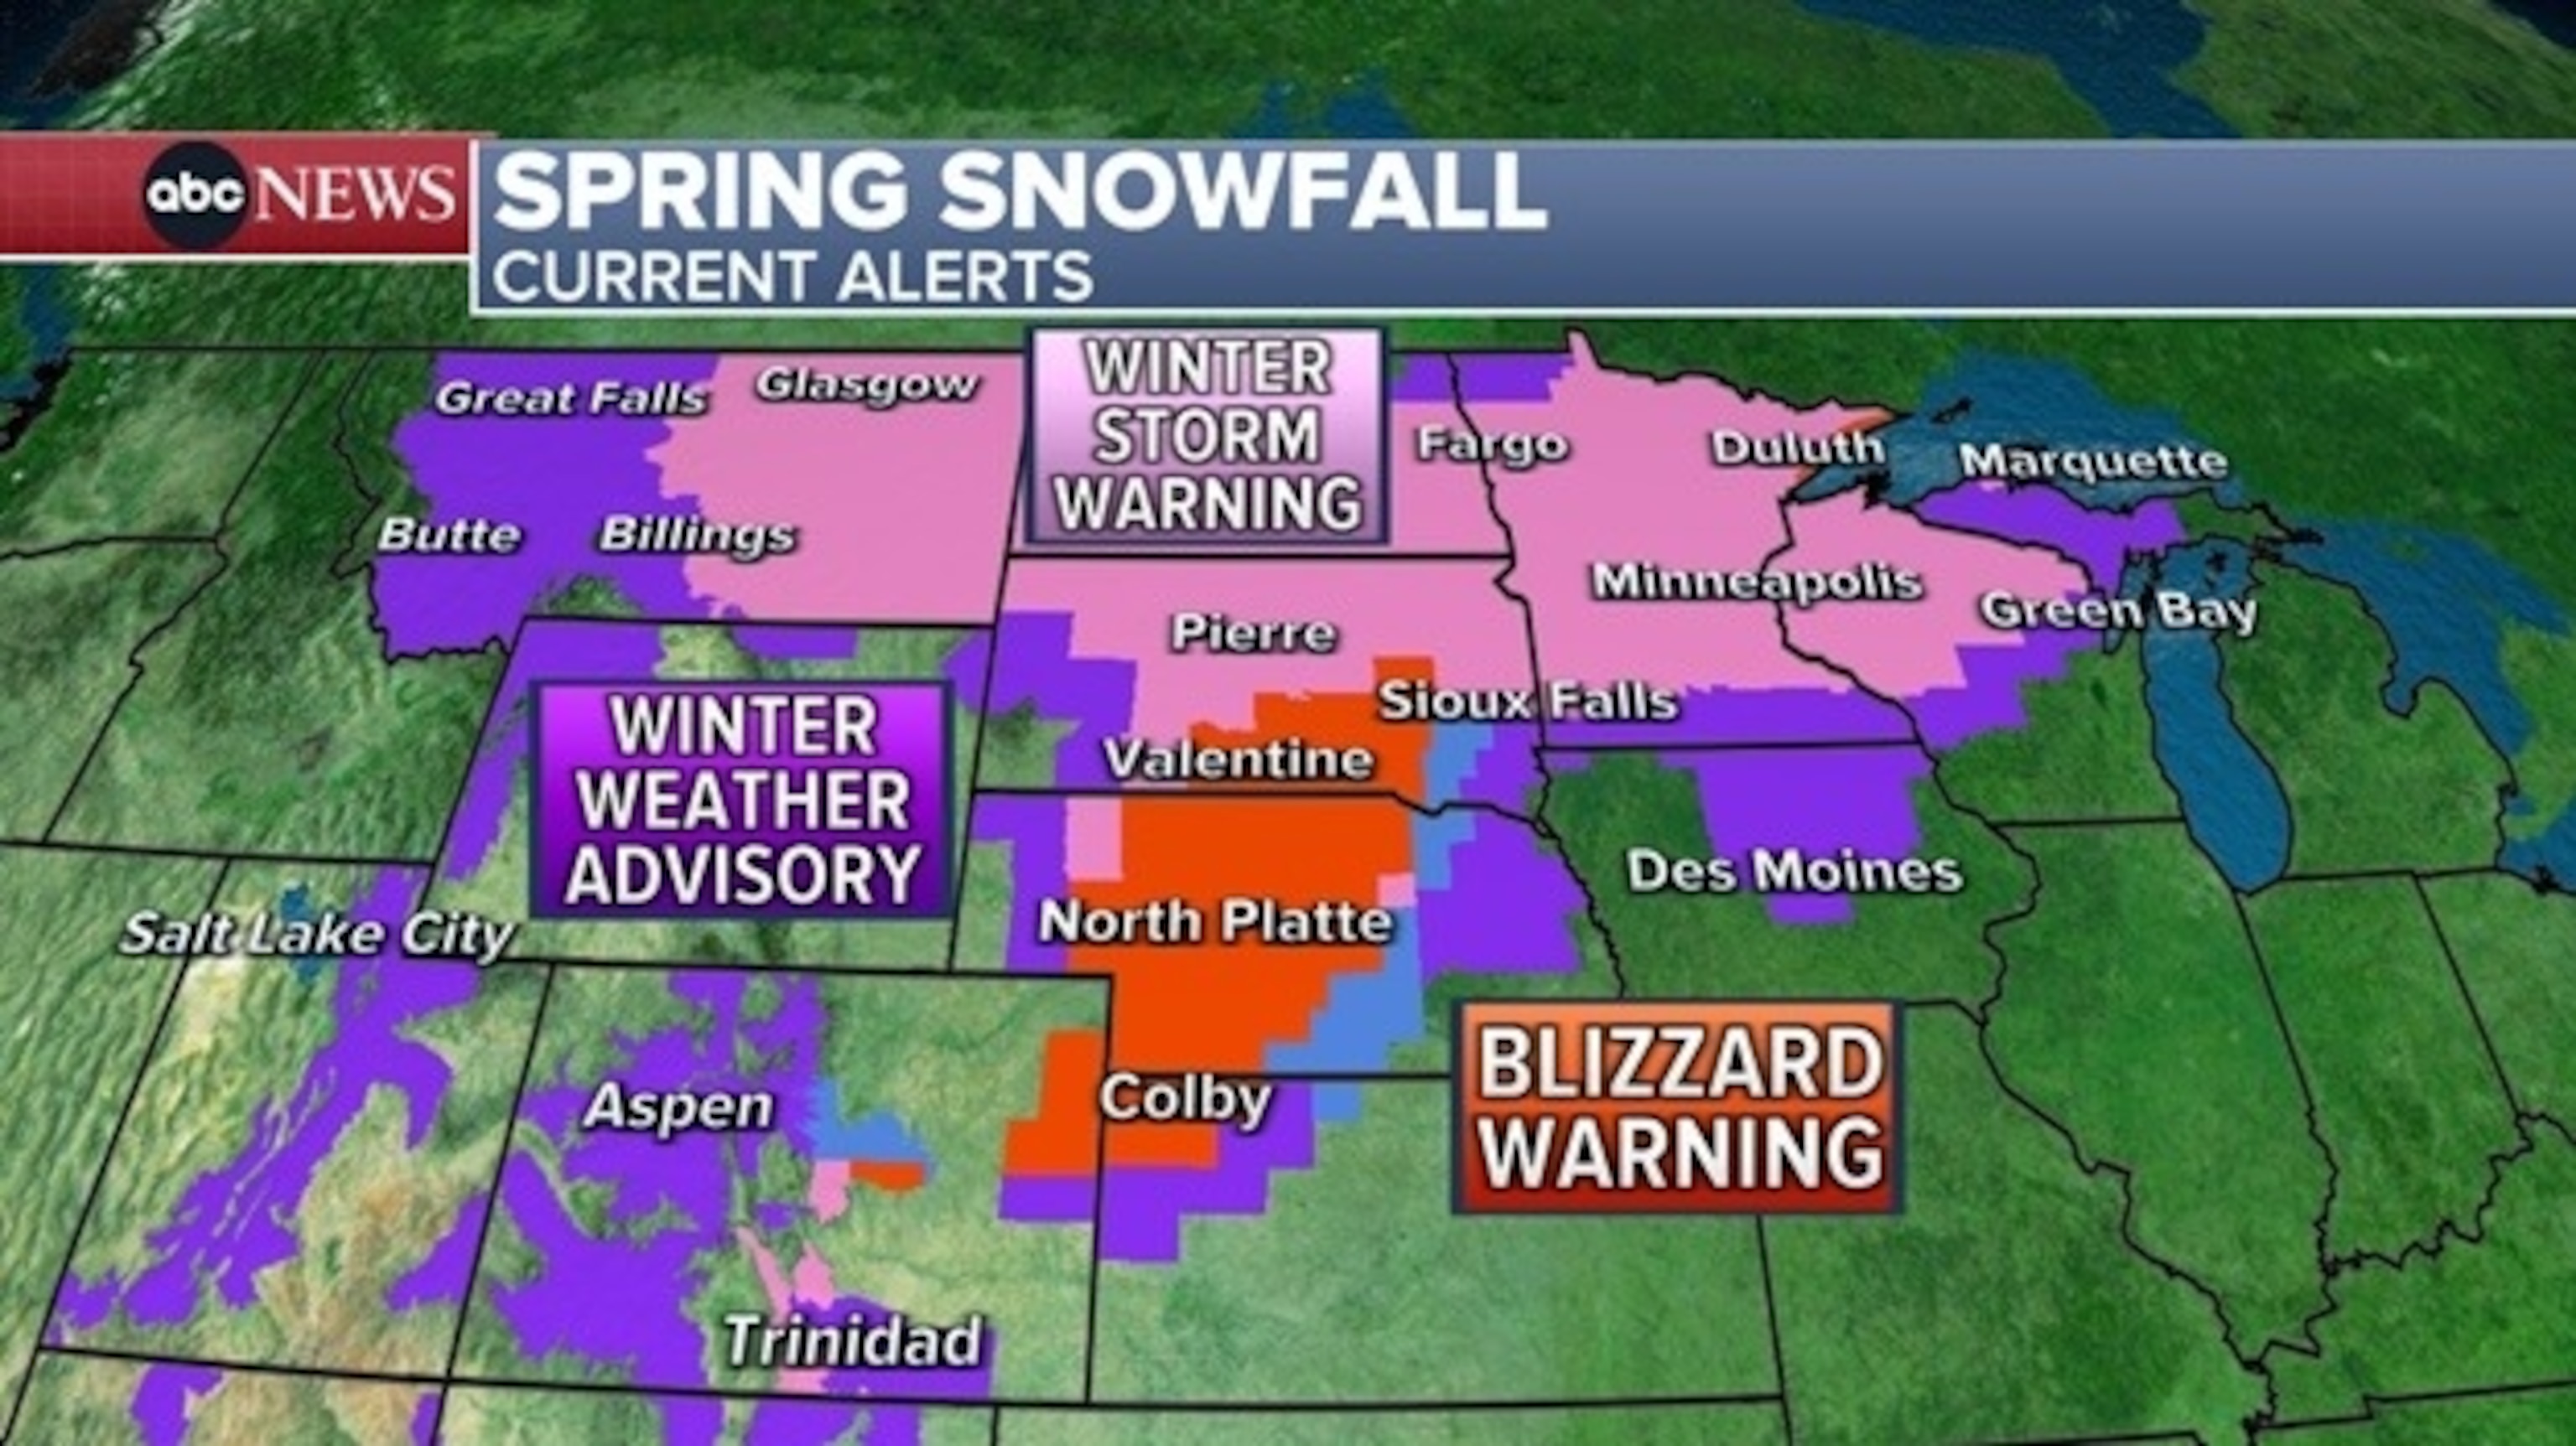 PHOTO: Winter alerts currently stretch across 14 states from Montana to Michigan, spanning a distance of nearly 1,400 miles.